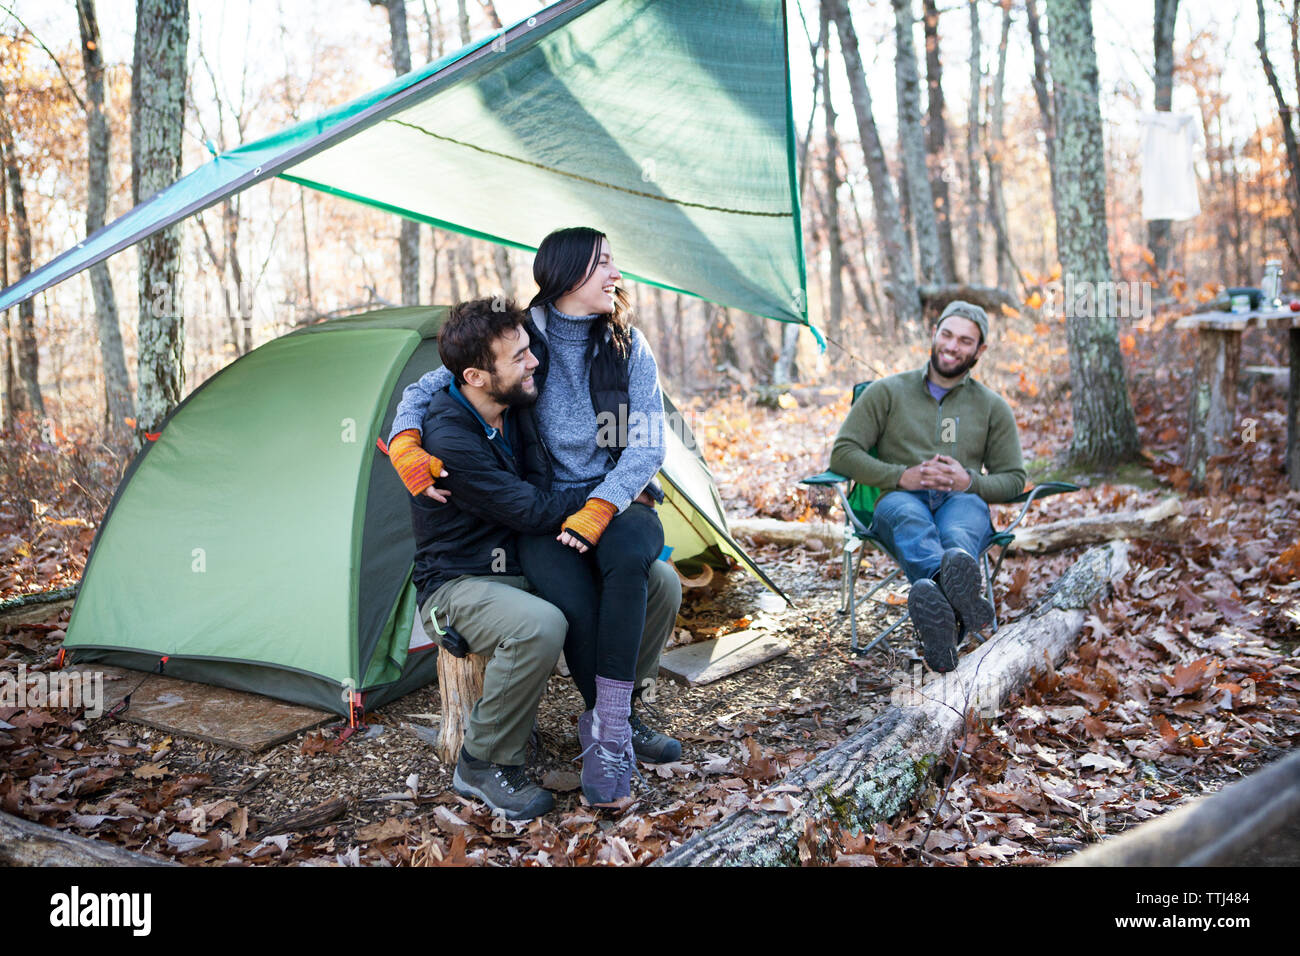 Friend looking at couple while sitting on tree stumps by tent in forest Stock Photo